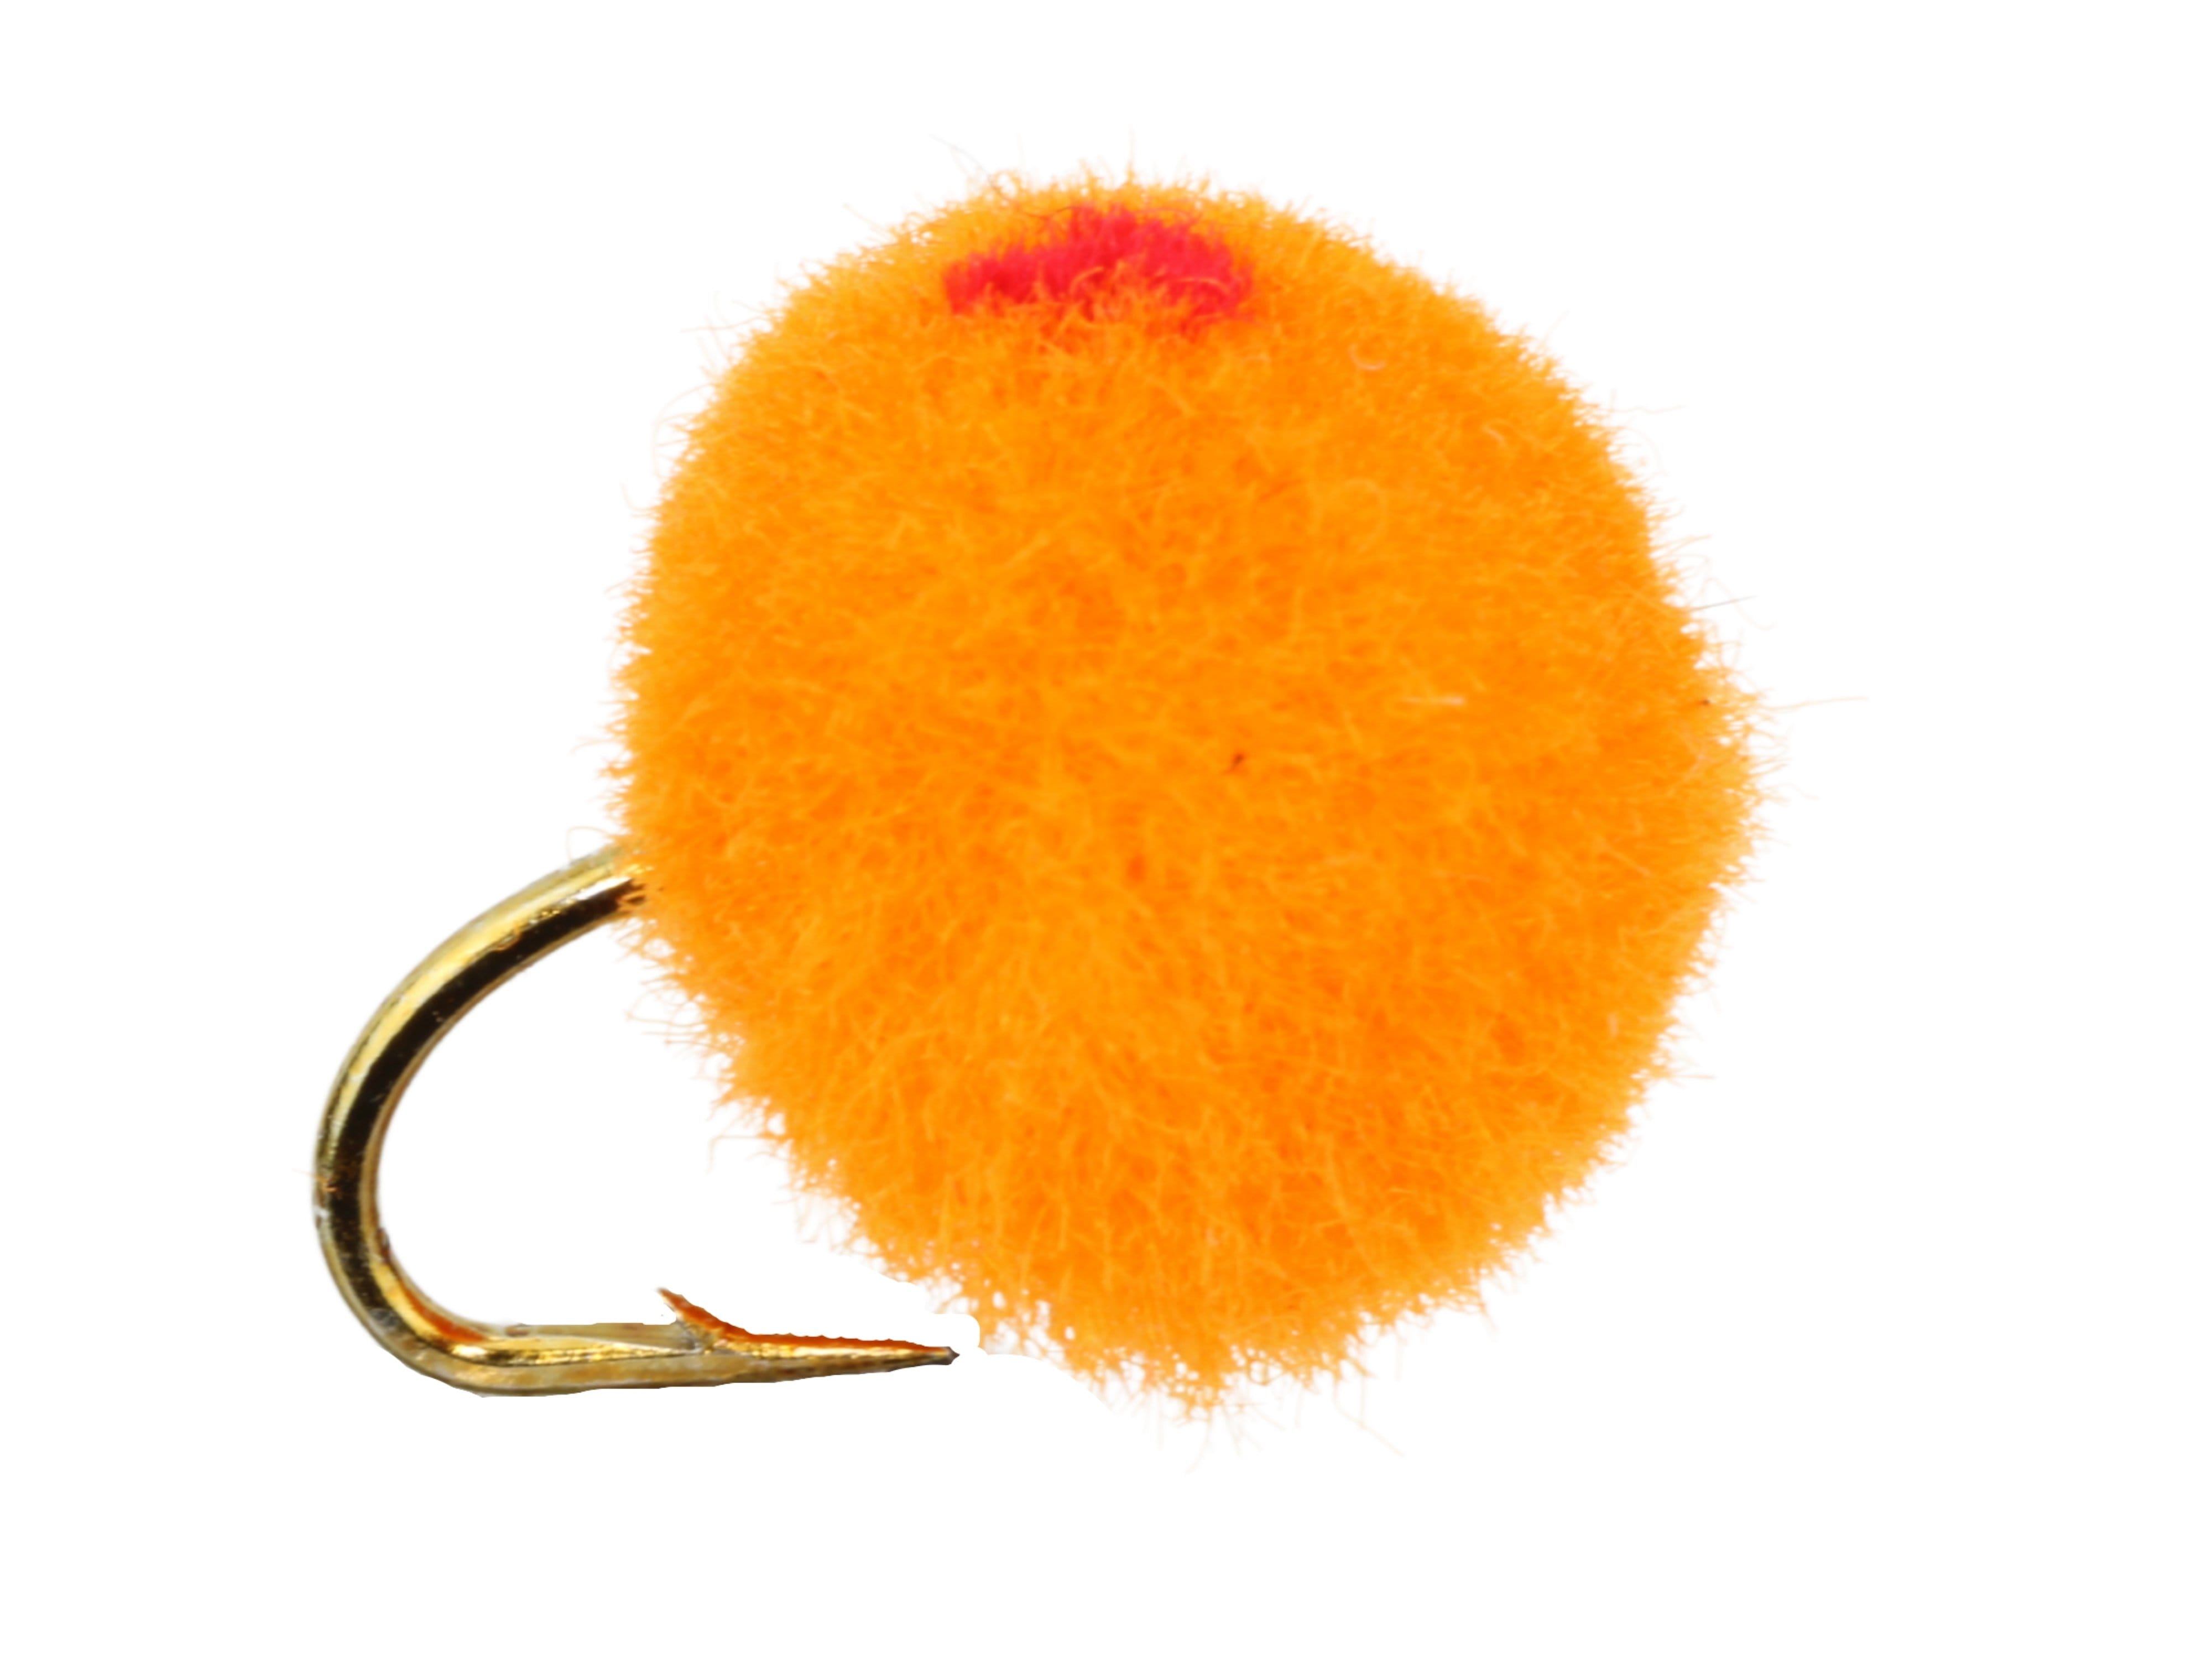 Wild Water Fly Fishing Orange Egg with Red Spot, Size 12, Qty. 6